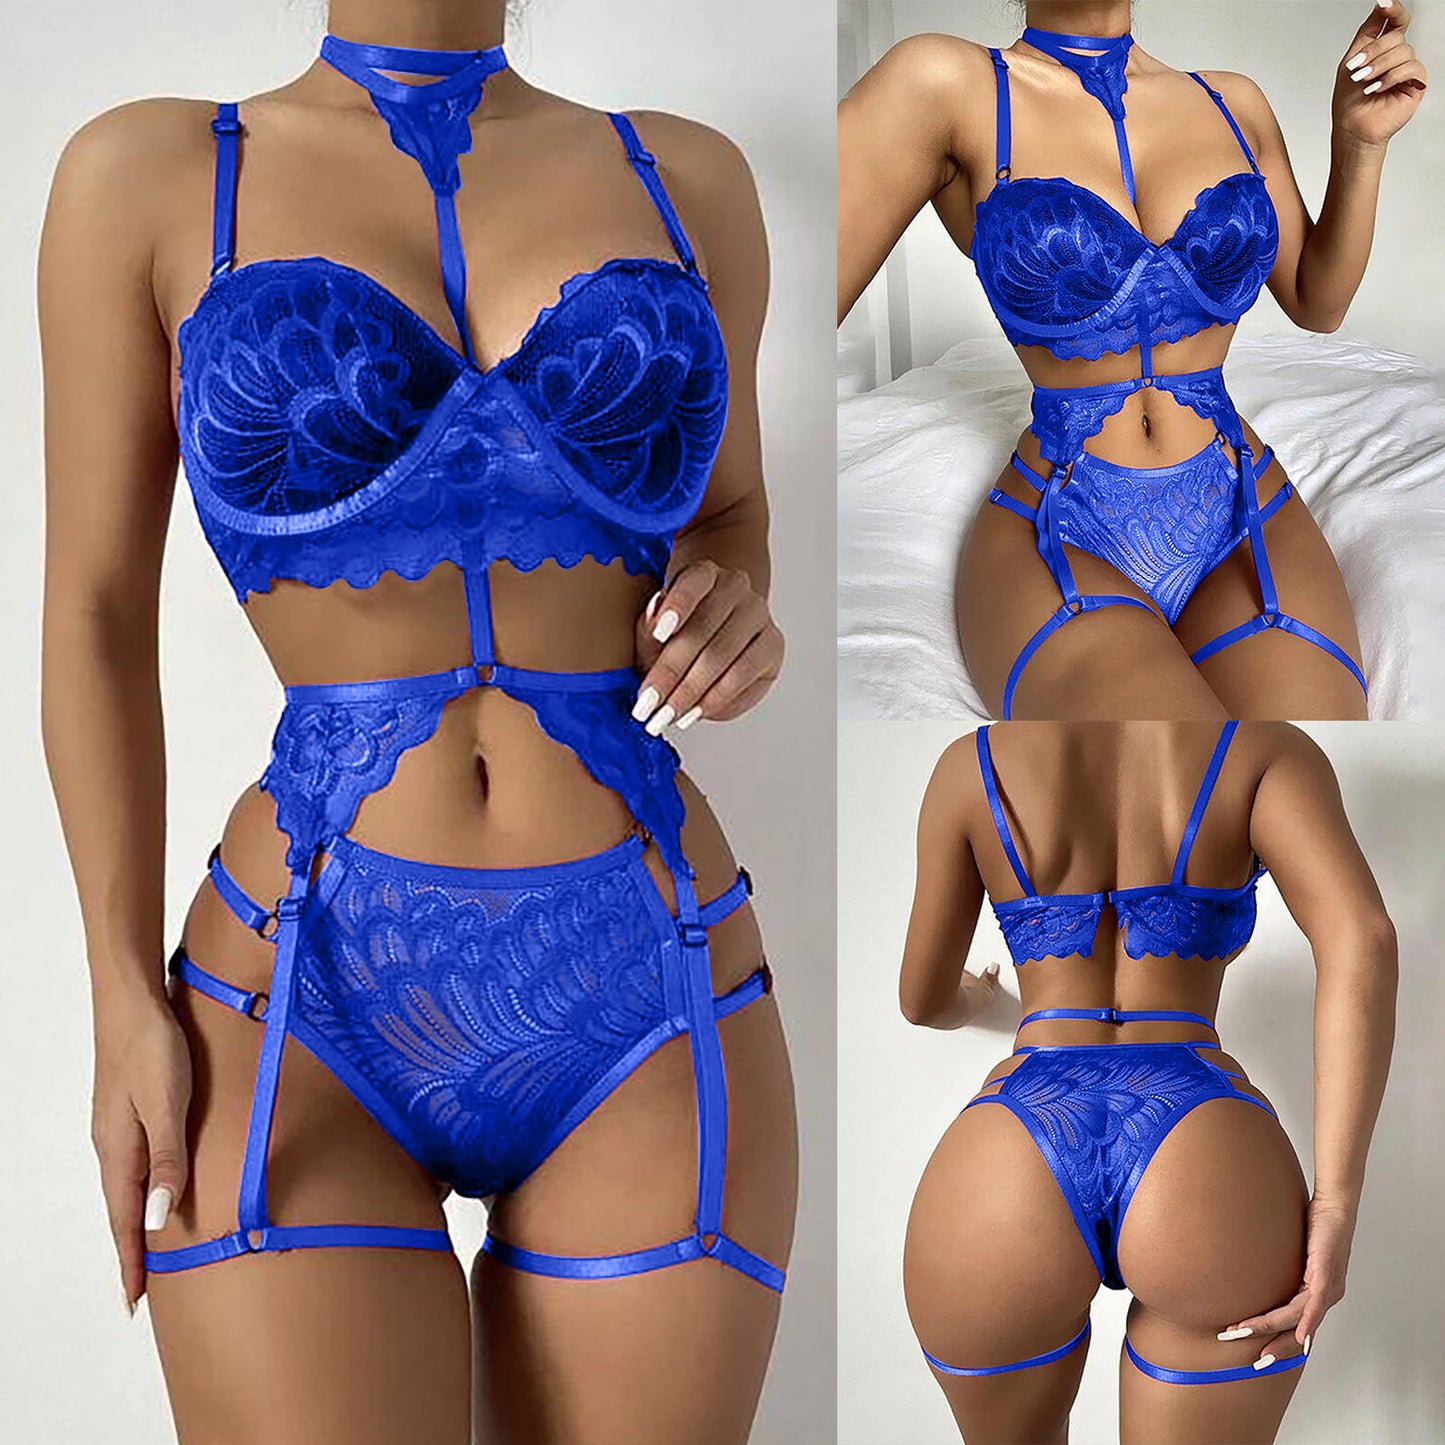 Sexy Embroidery Strappy Choker Neck Garter Sets